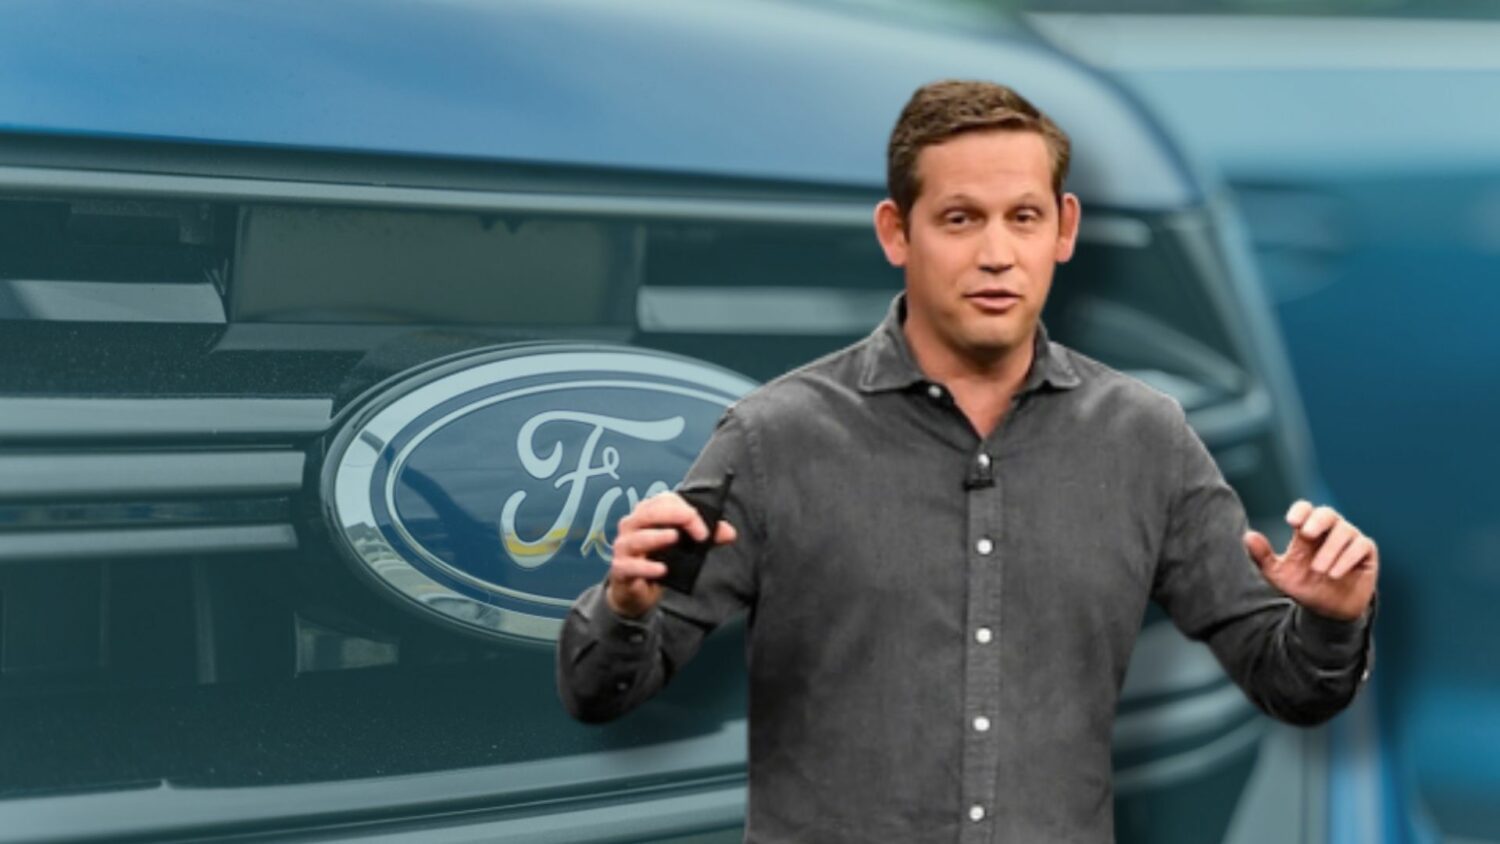 Ford has hired Apple's ex-vice president of services, Peter Stern, to lead the development of new technologies and services.